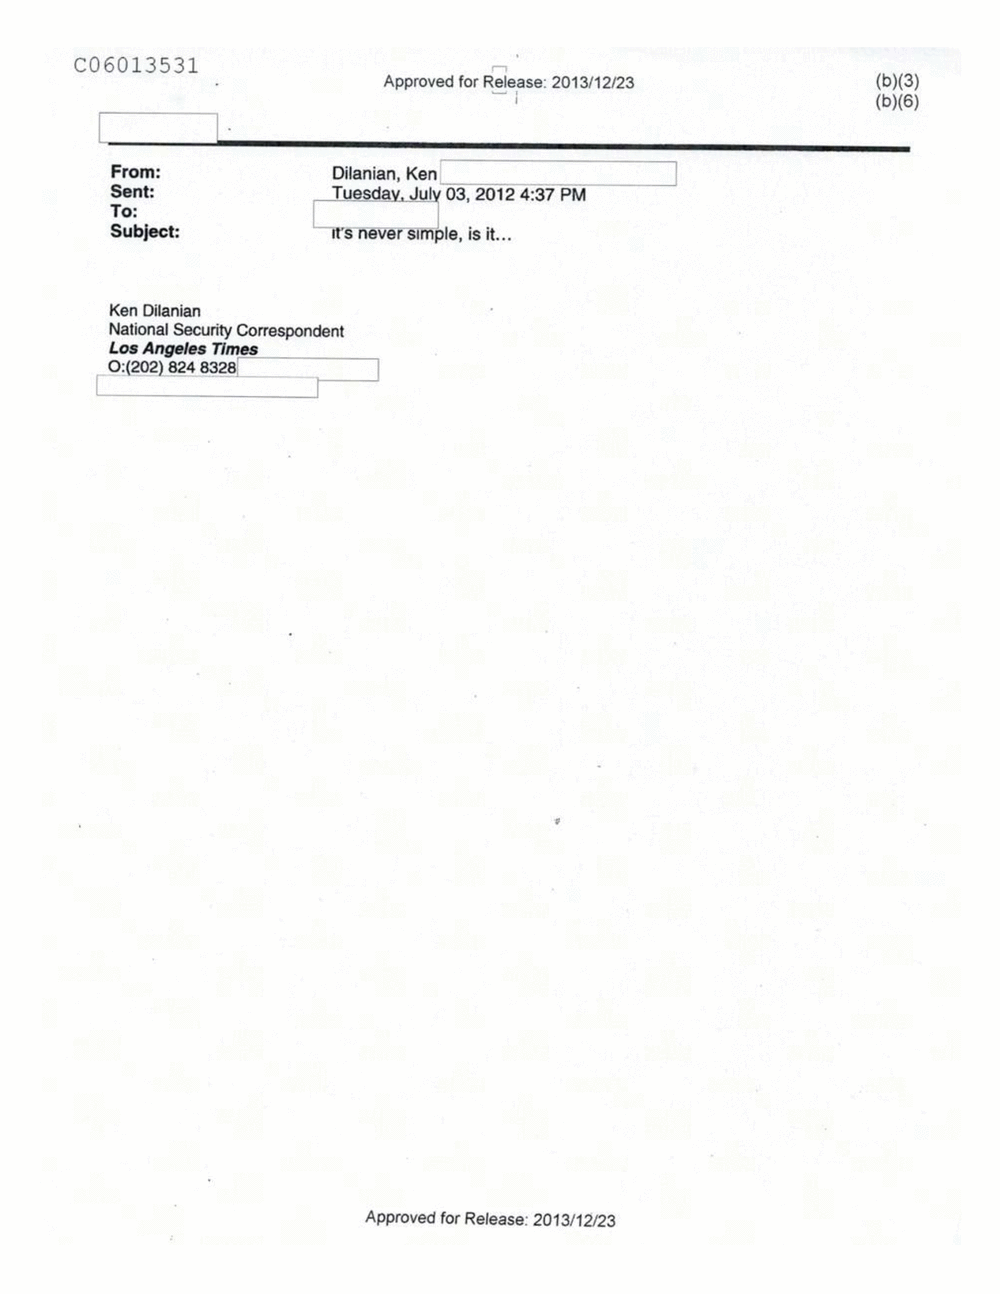 Page 370 from Email Correspondence Between Reporters and CIA Flacks